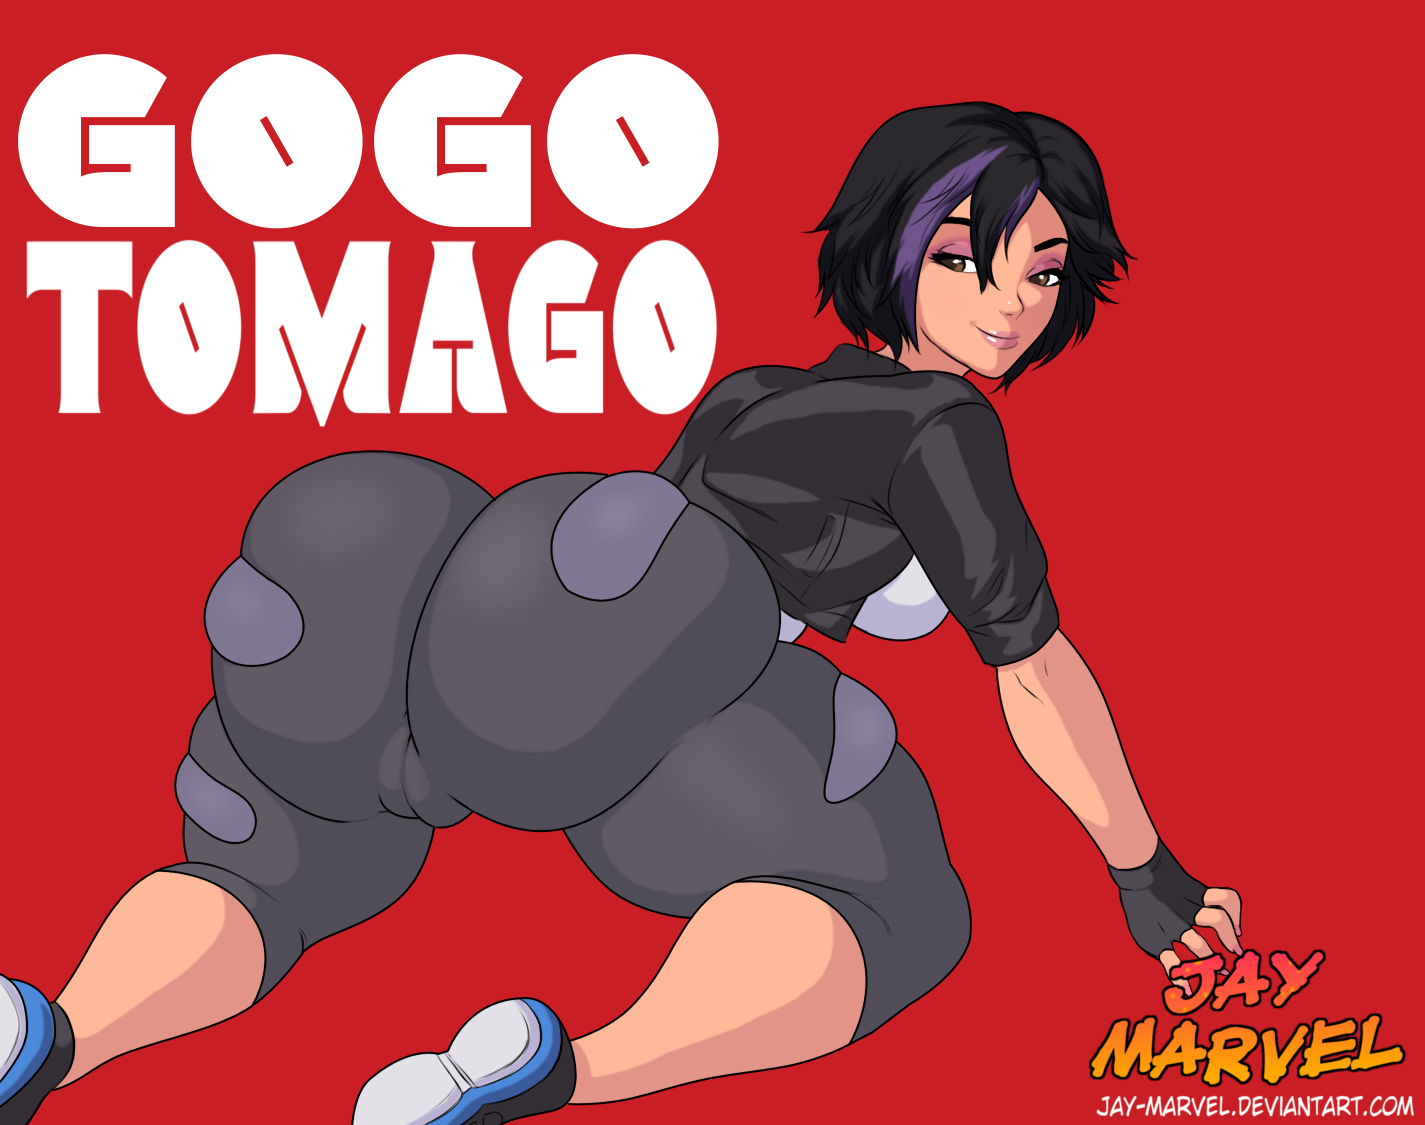 tmp_18929-Gogo_Tomago_by_Jay-Marvel313619218.png.